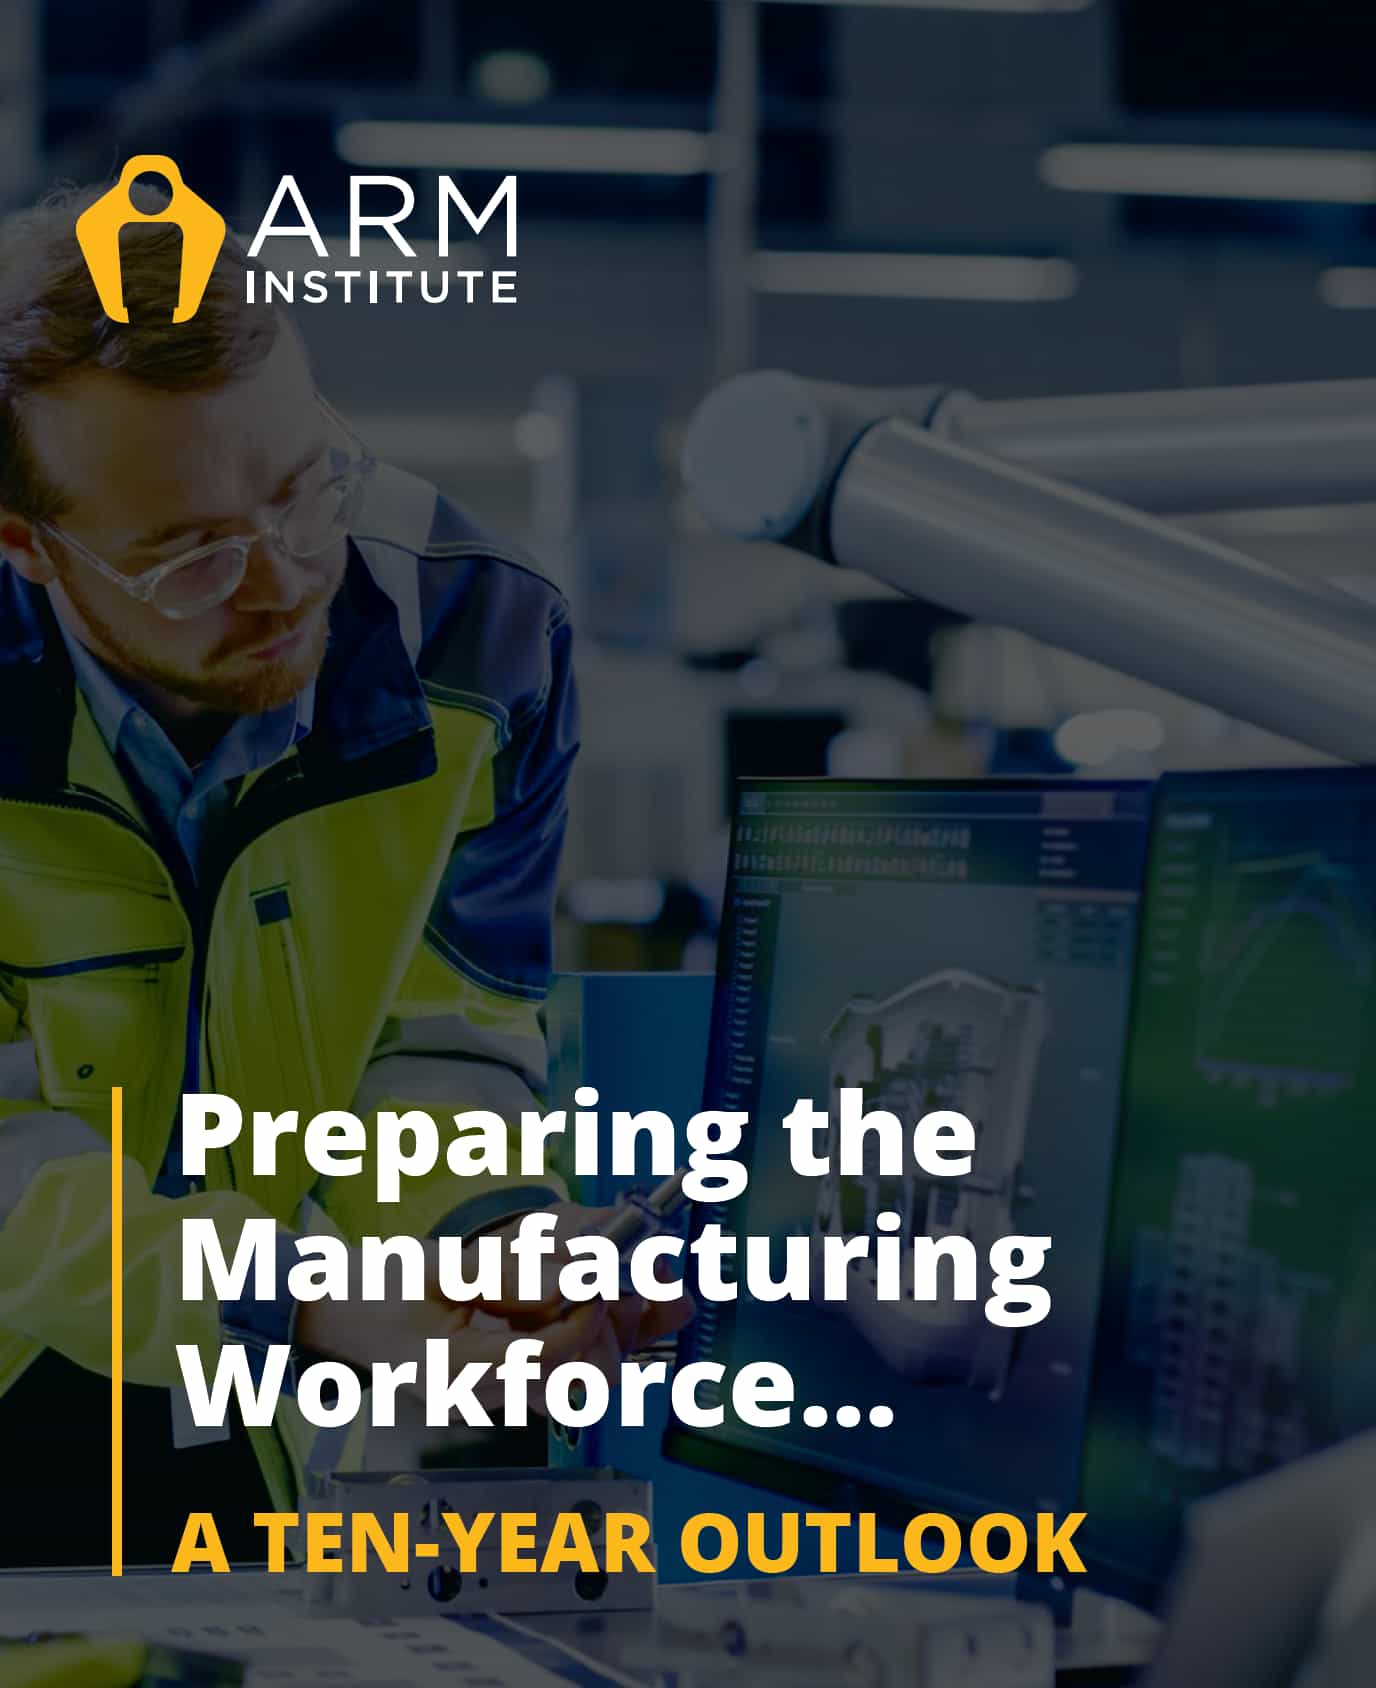 Image showing the cover of the ARM Institute's Future of Work Report